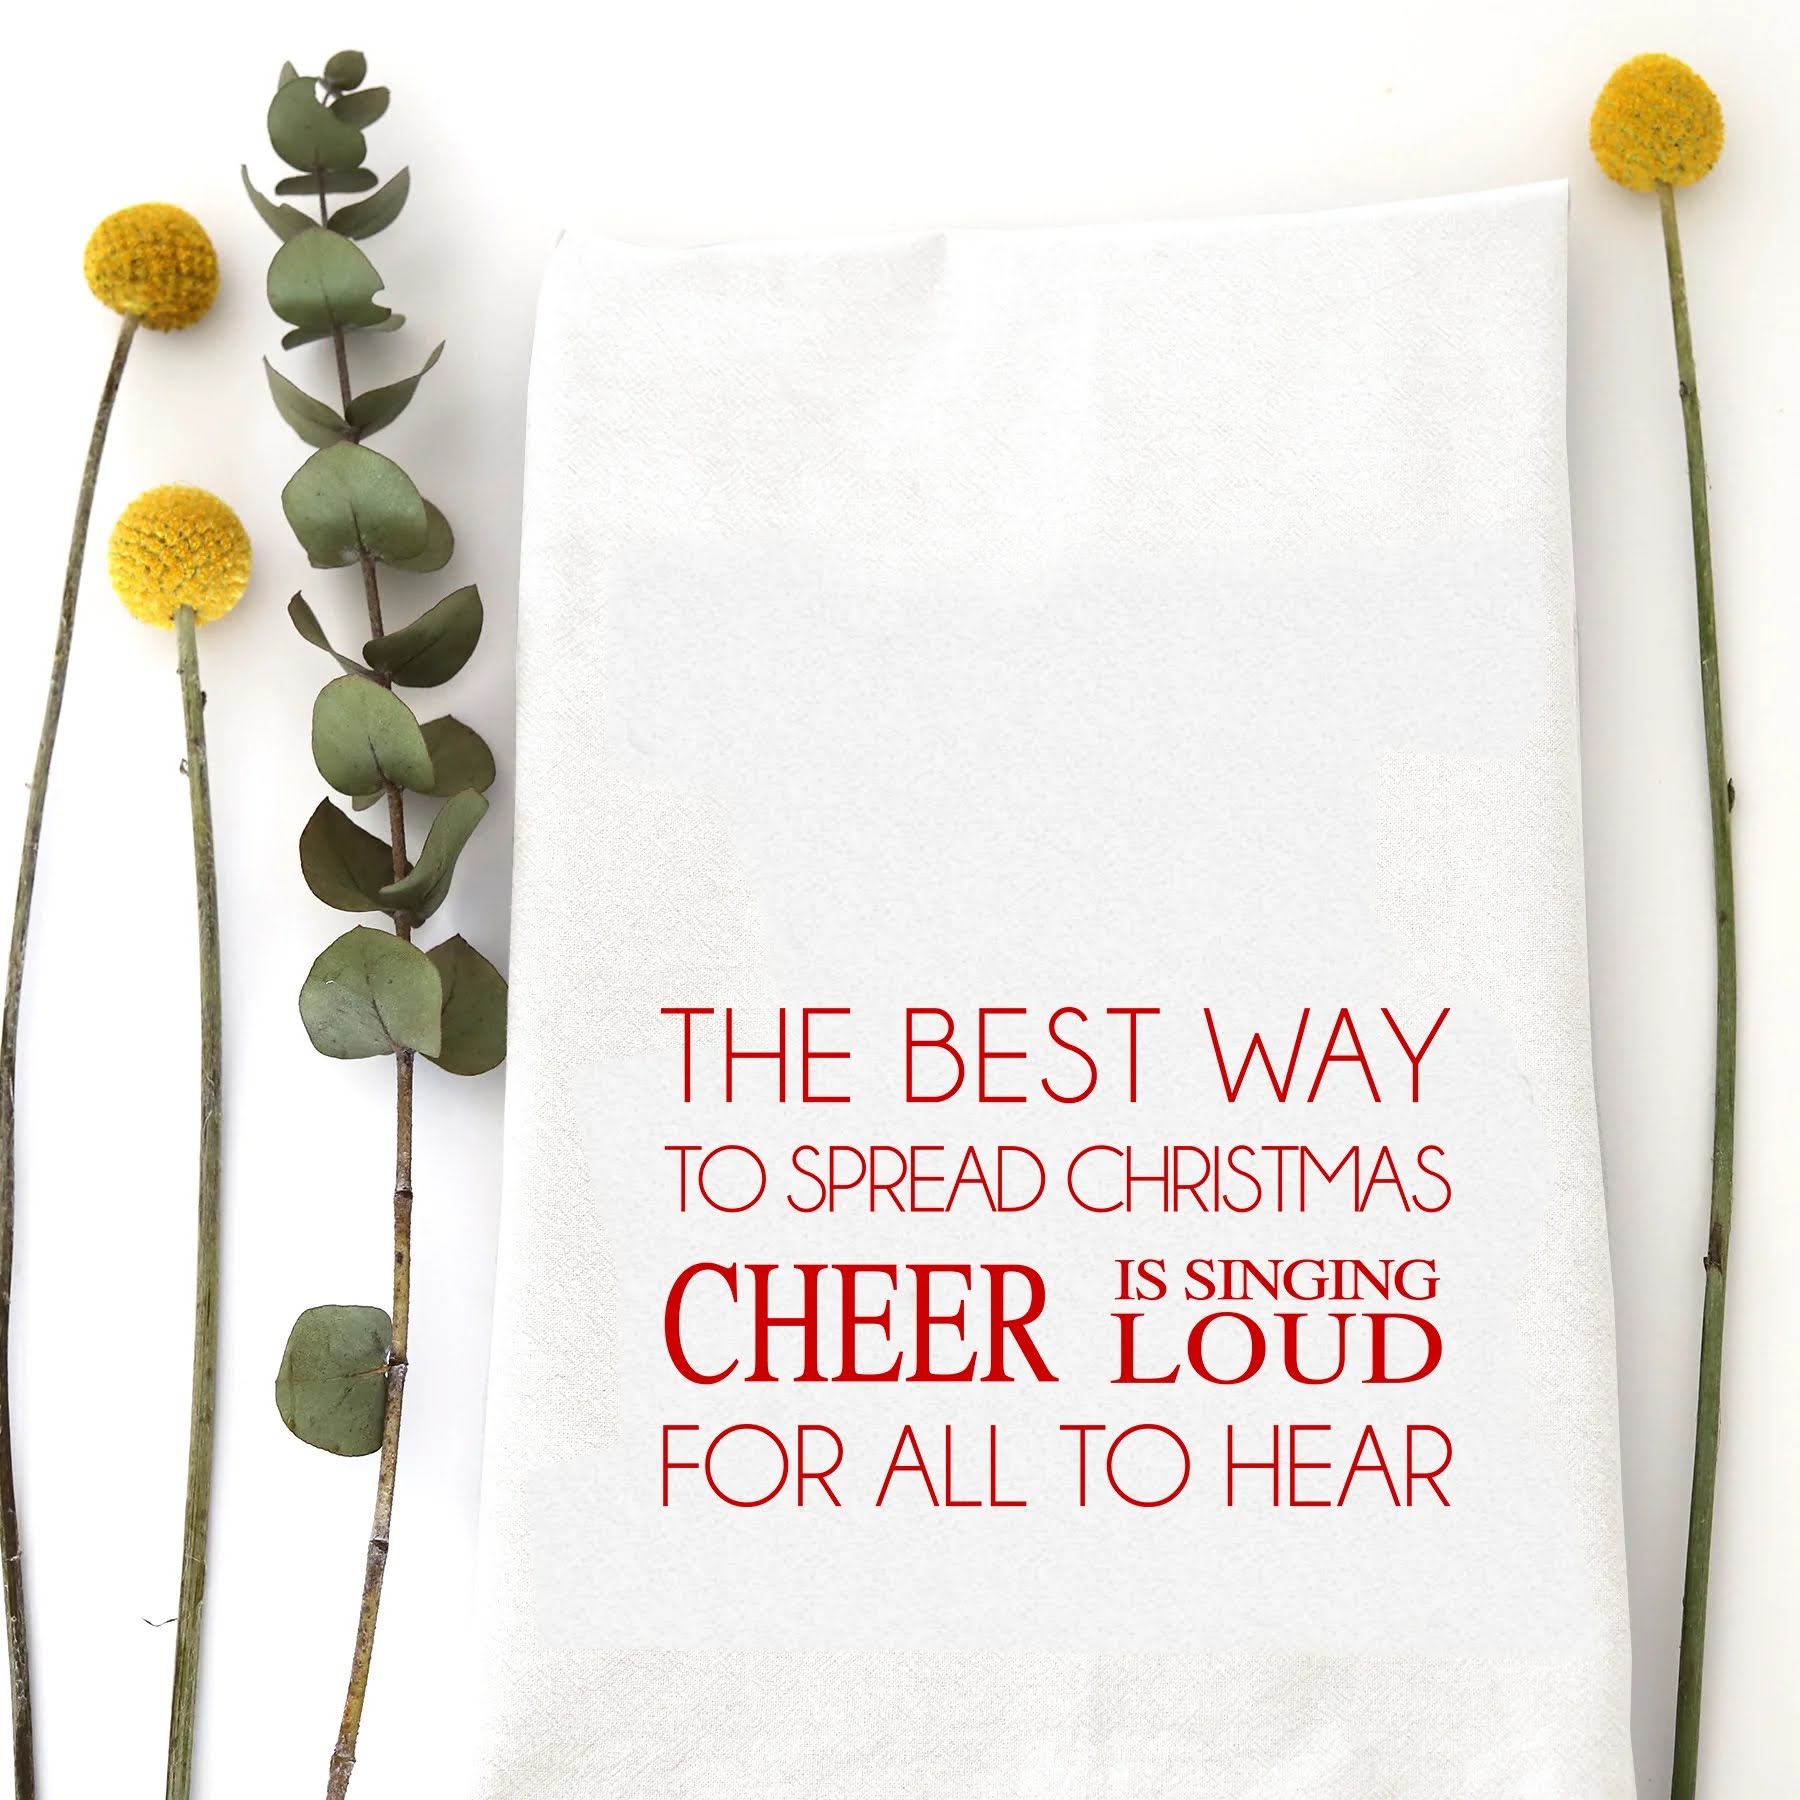 A holiday tea towel with the words "The best way to spread Christmas cheer is singing loud for all to hear" printed on it.